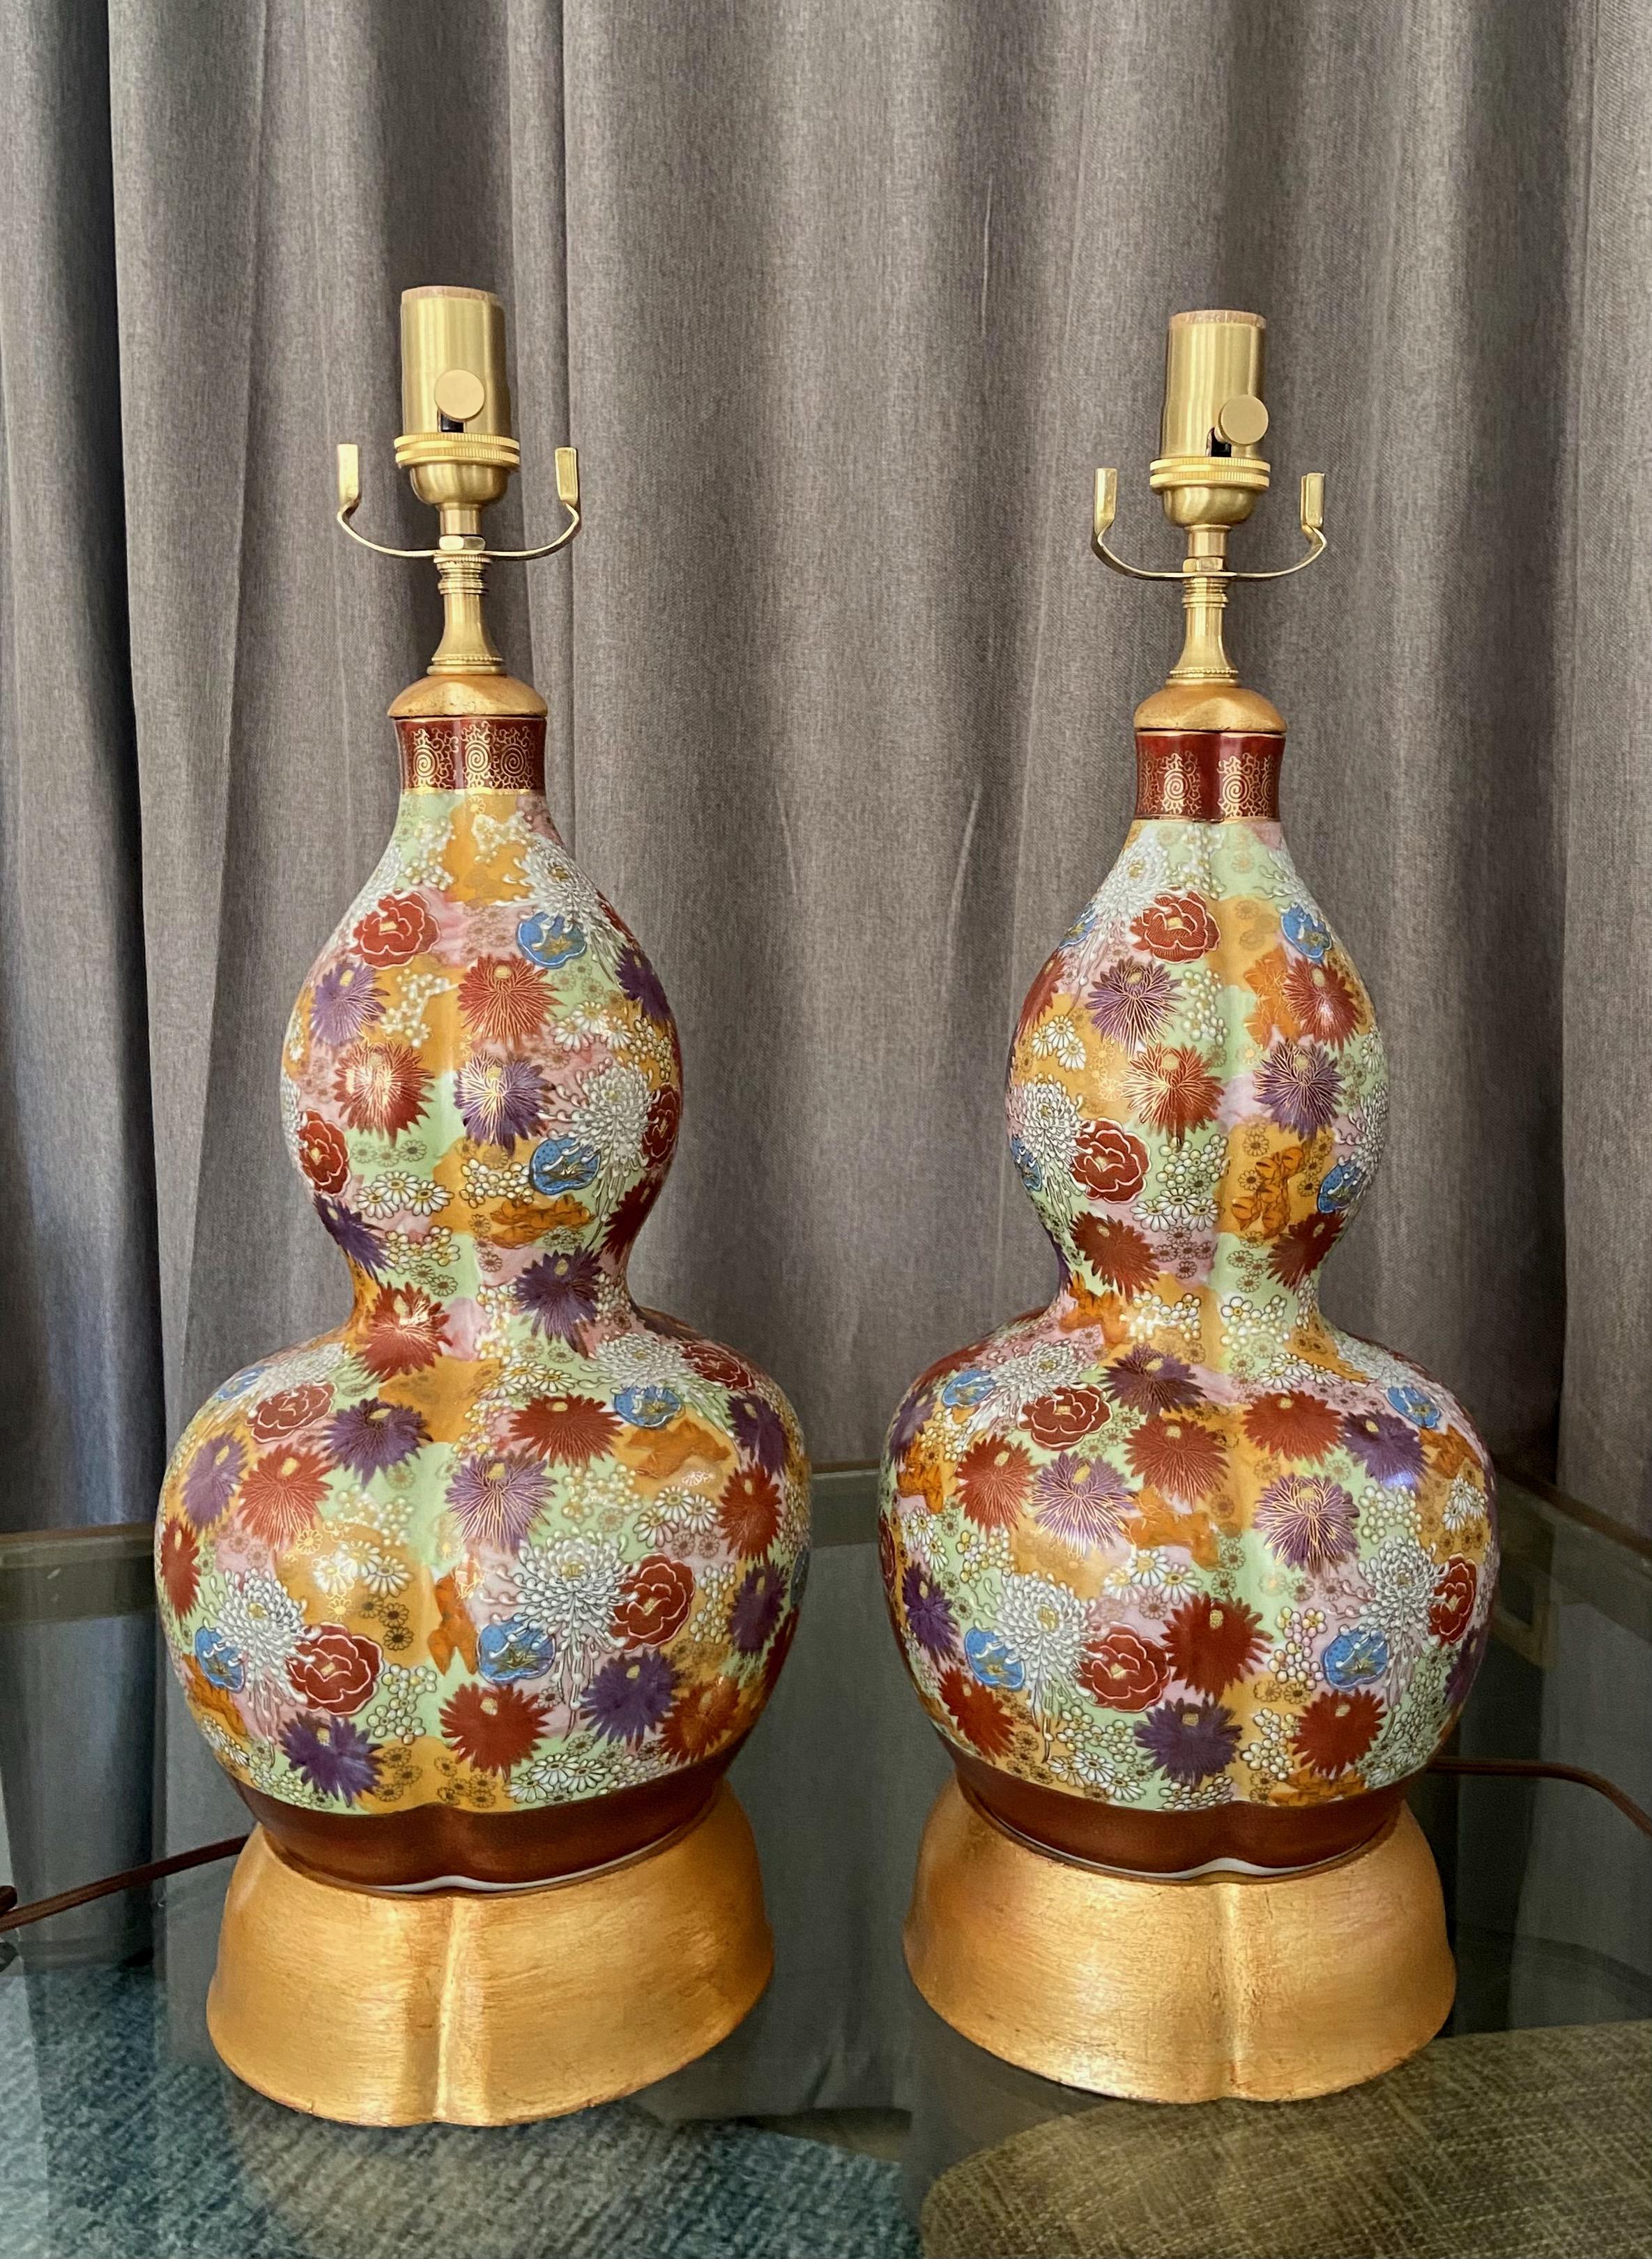 Pair of hand painted floral motif Japanese Satsuma vases mounted on custom gilt turned wood lamp bases. The vases are profusely and expertly painted with different blooms and blossoms in an array of rich colours. Both vases are signed to bottom.